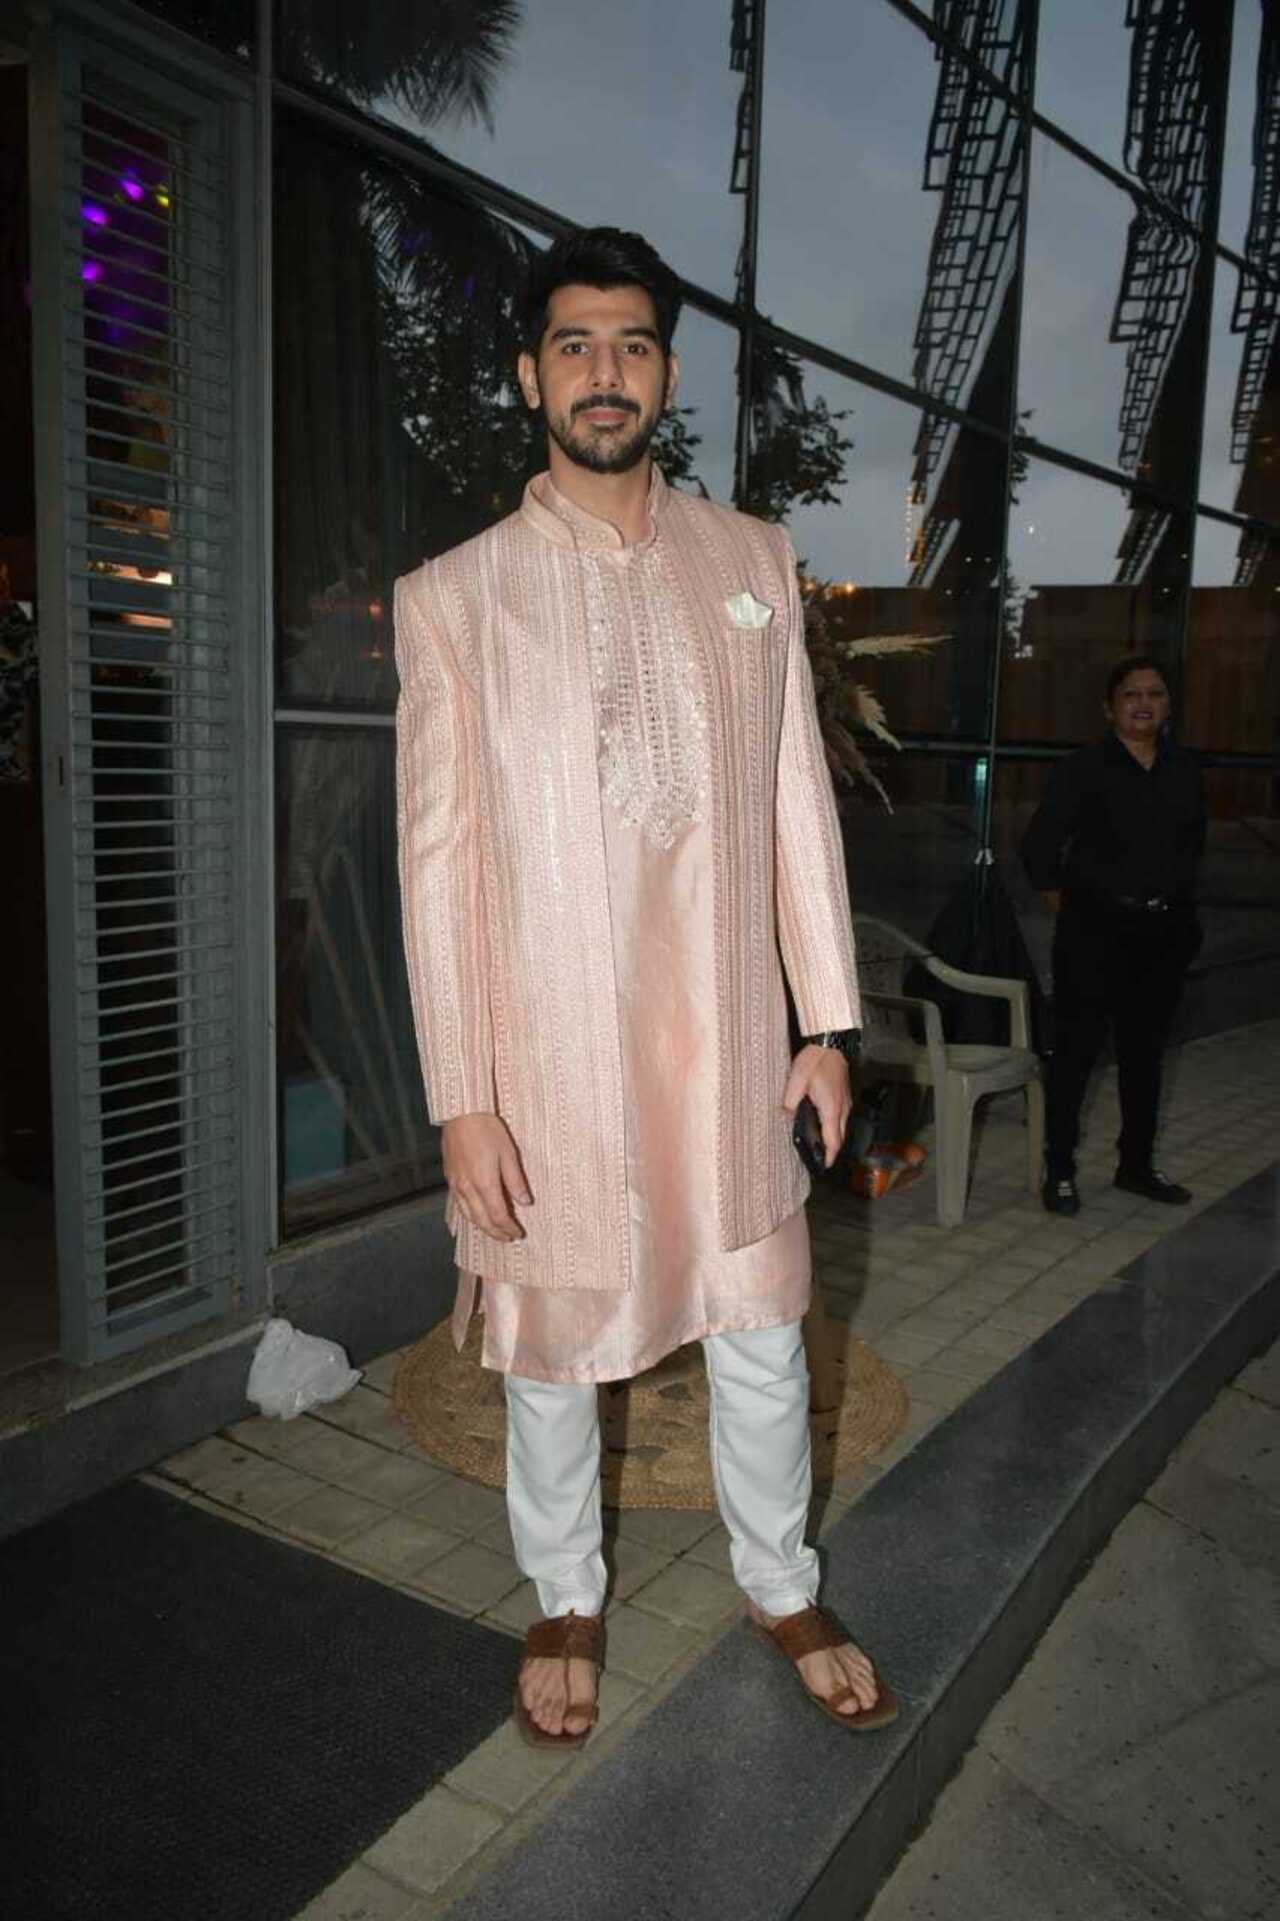 Pavail Gulati was also spotted attending the celebration